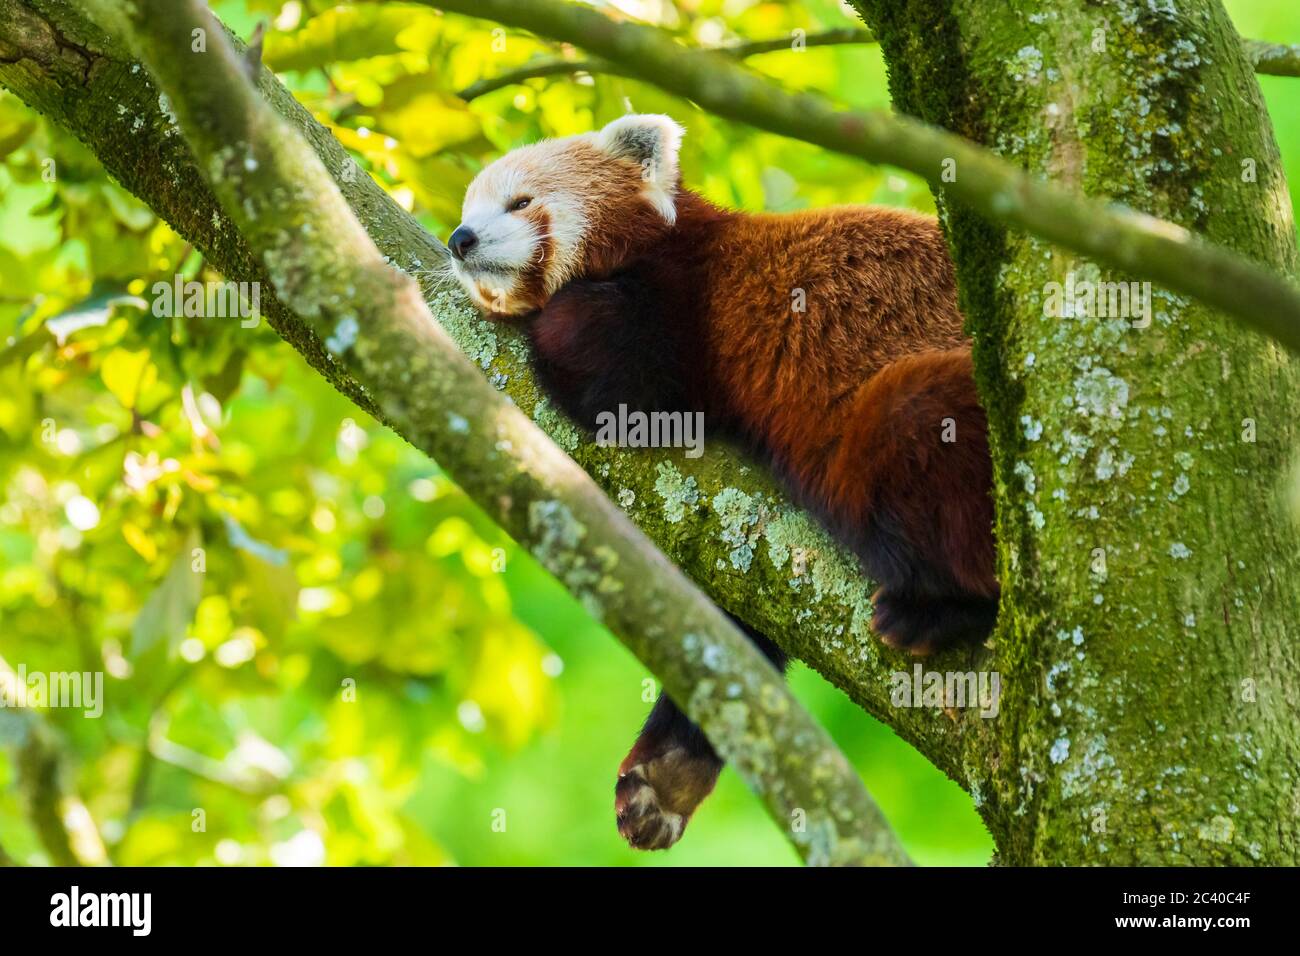 Little red panda resting in a tree facing the camera. This is a small arboreal mammal native to the eastern Himalayas and southwestern China that has Stock Photo